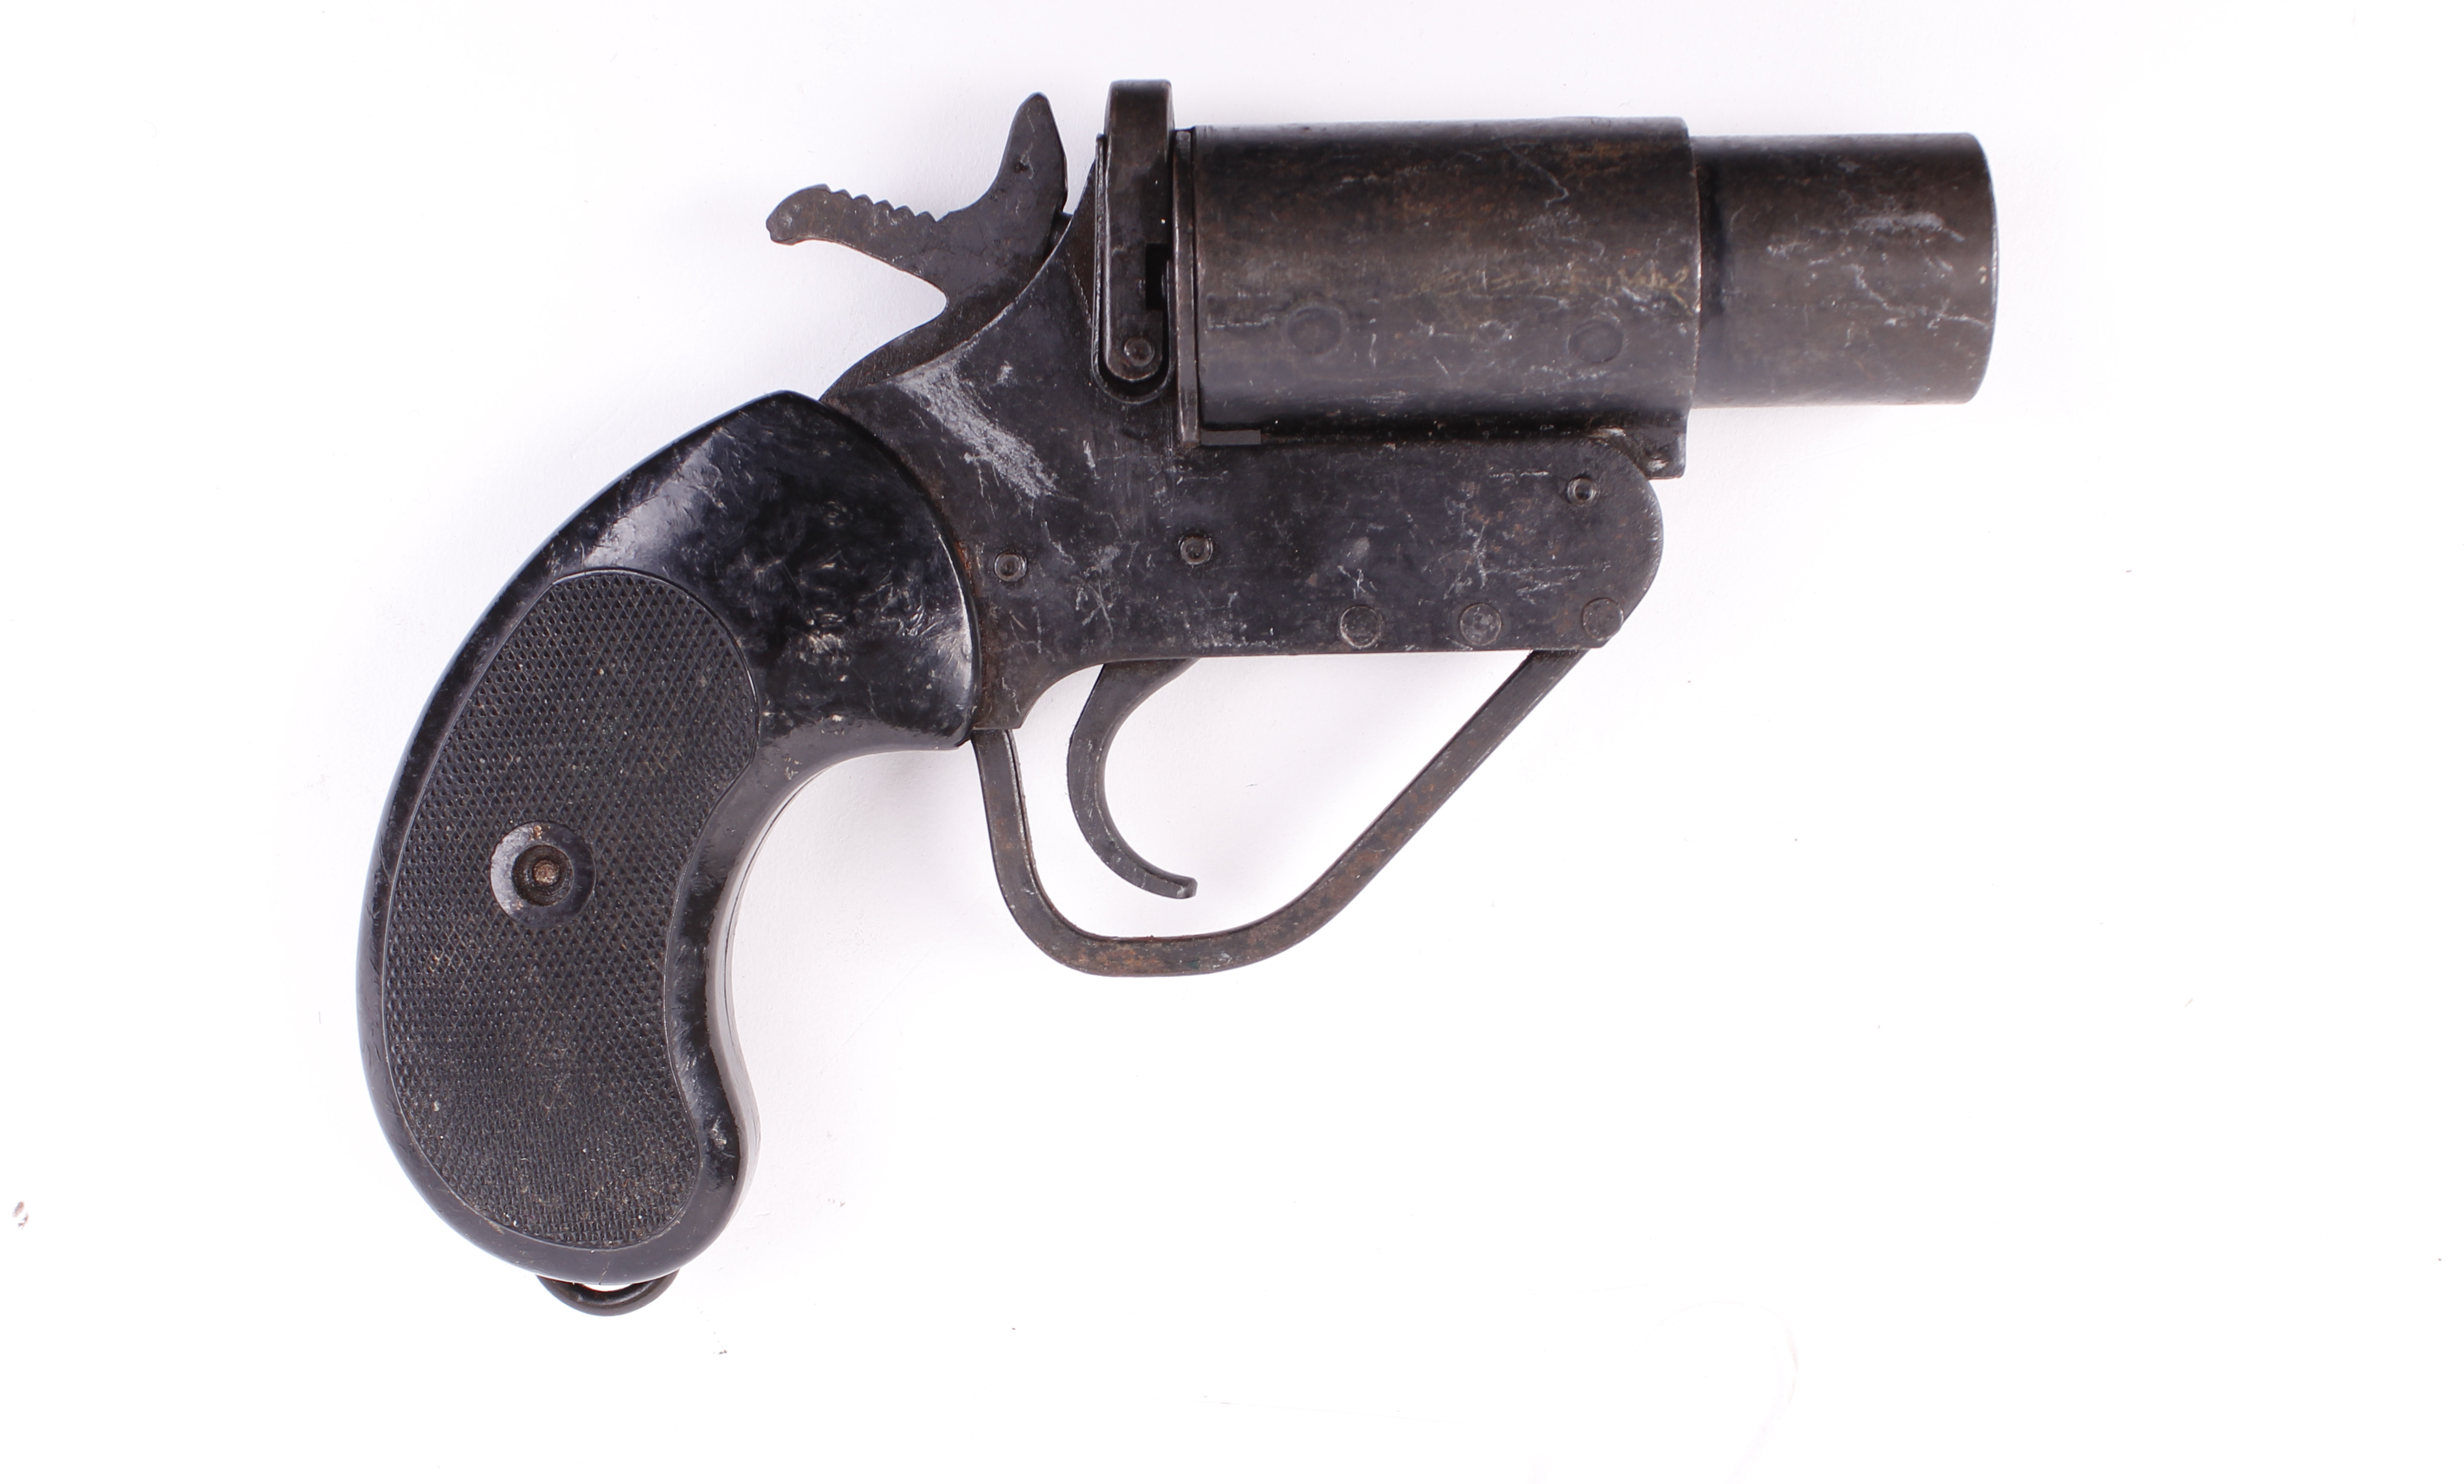 (S1) 1 ins Flare pistol, steel frame, black plastic grips, no. PW472 [Purchasers Please Note: